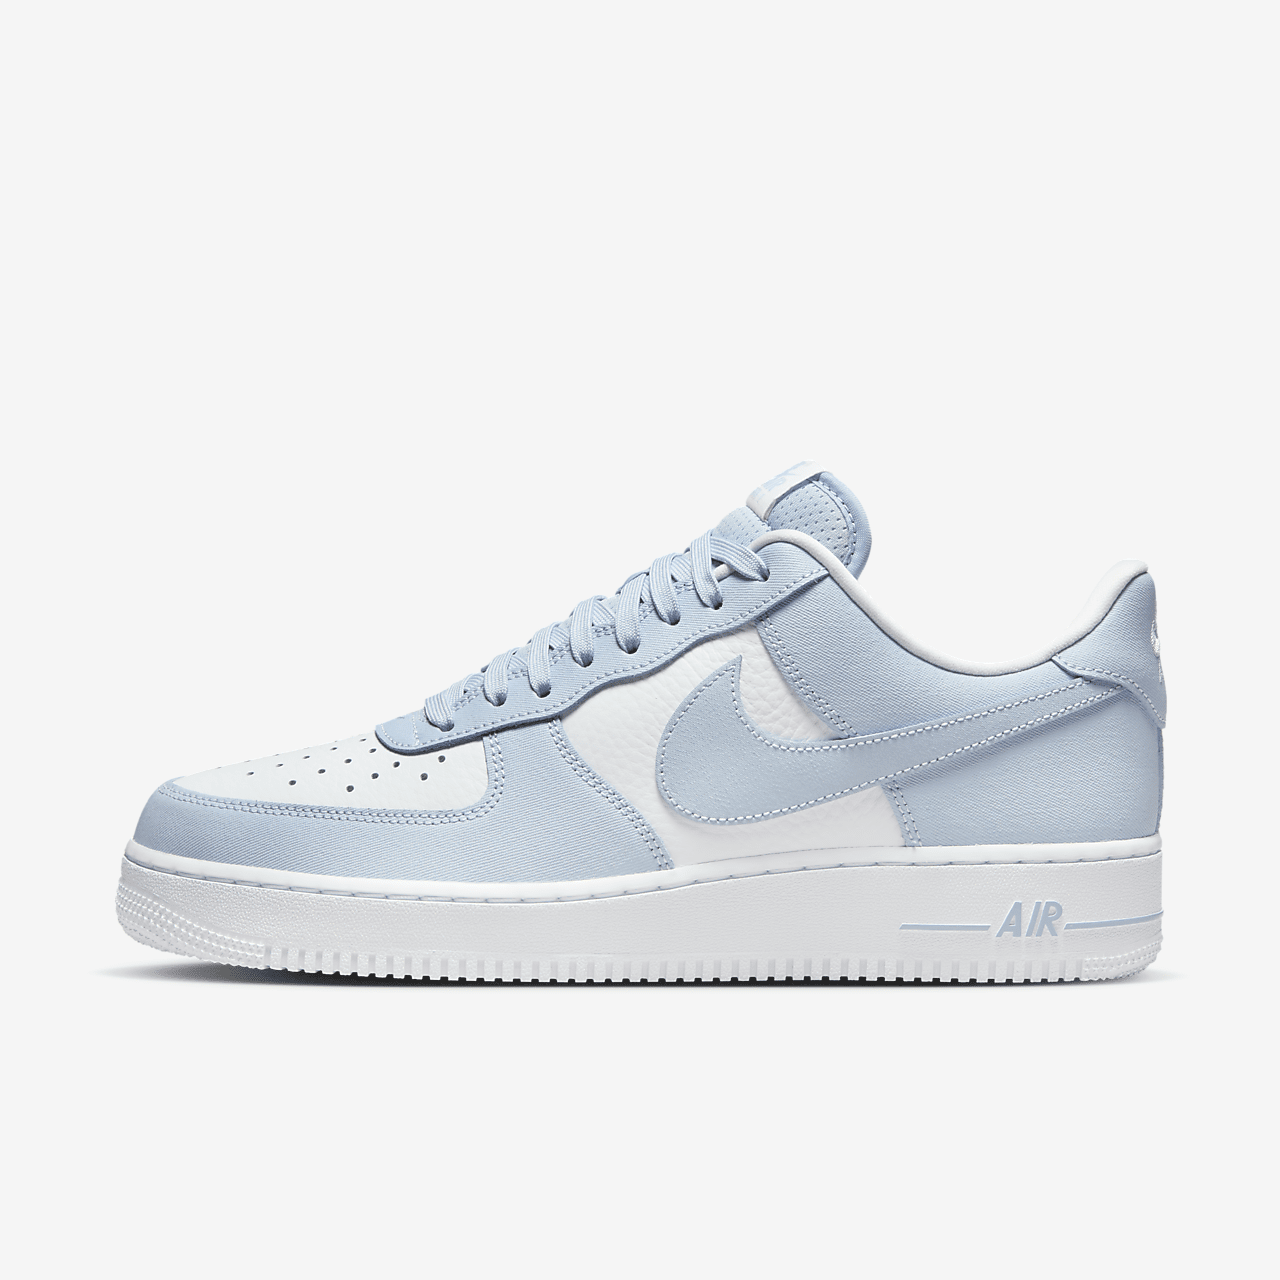 Nike Air Force 1 07 Light Armoury Blue FZ4627-400 | More Sneakers